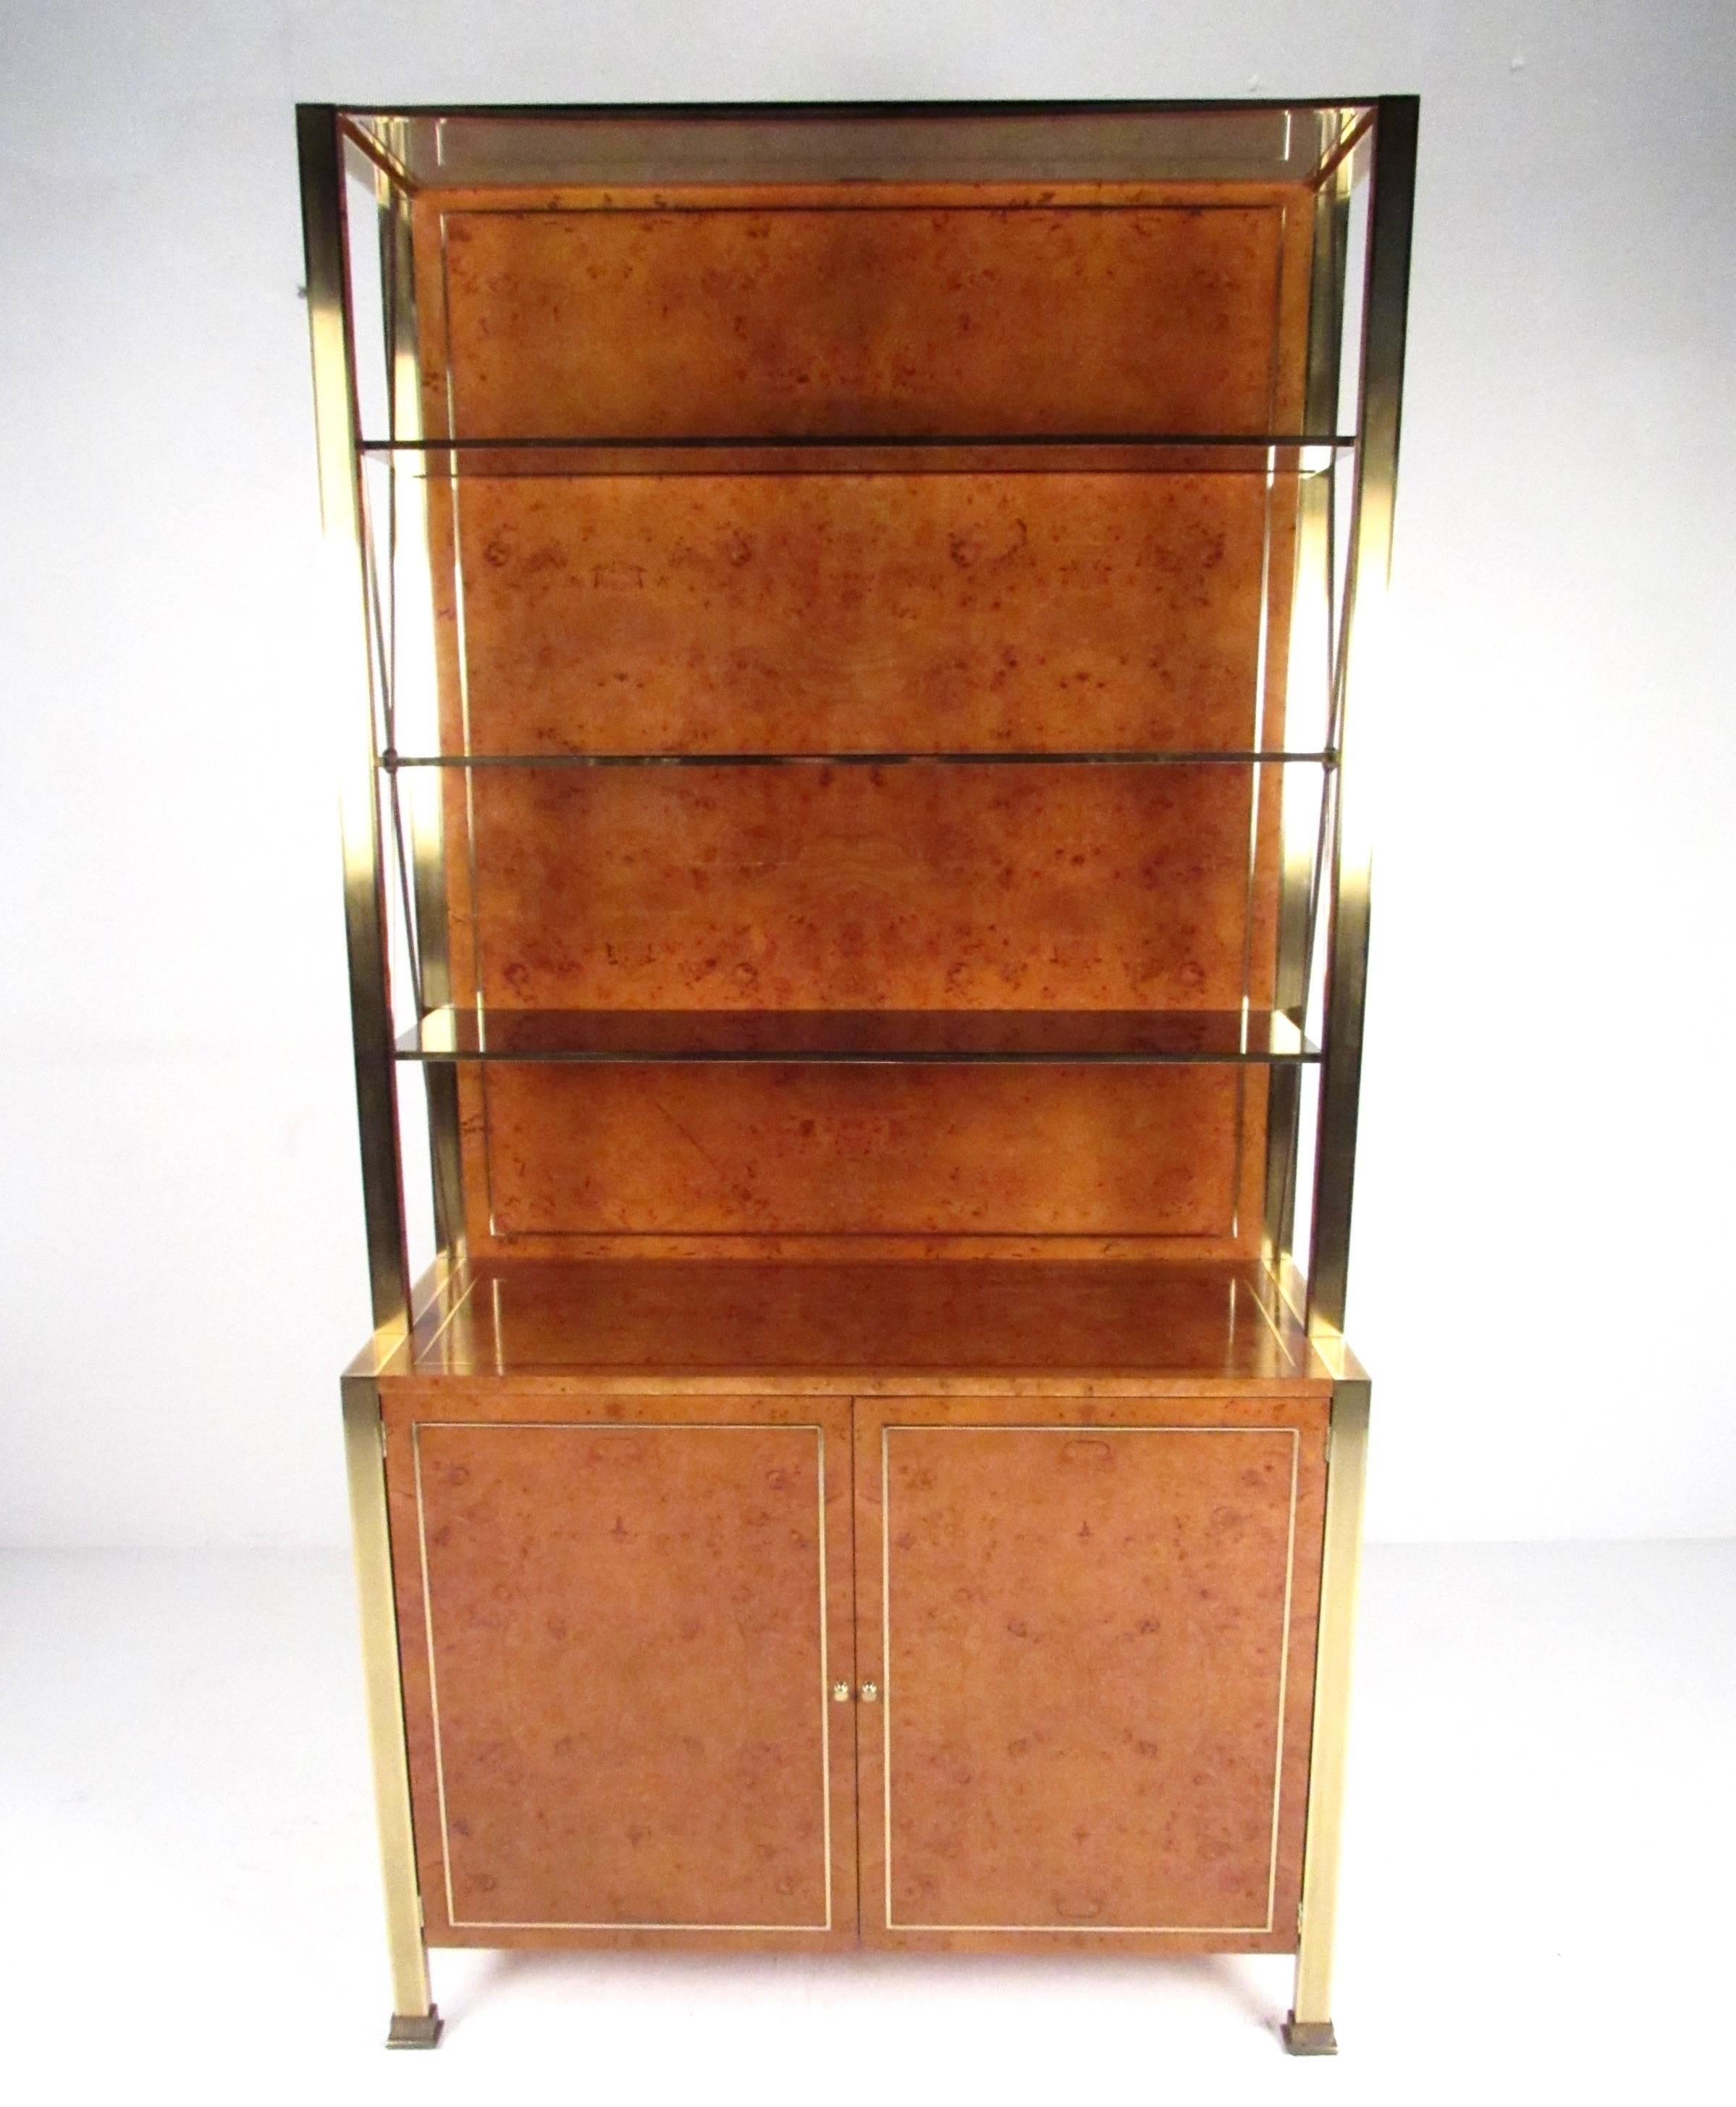 This stylish Mid-Century Modern cabinet offers a mix of shelved cabinet storage and open etagere style display with Italian design aesthetics. Smoked glass shelves, brass trim and rich burl finish add to the elegant appeal of this vintage Willy